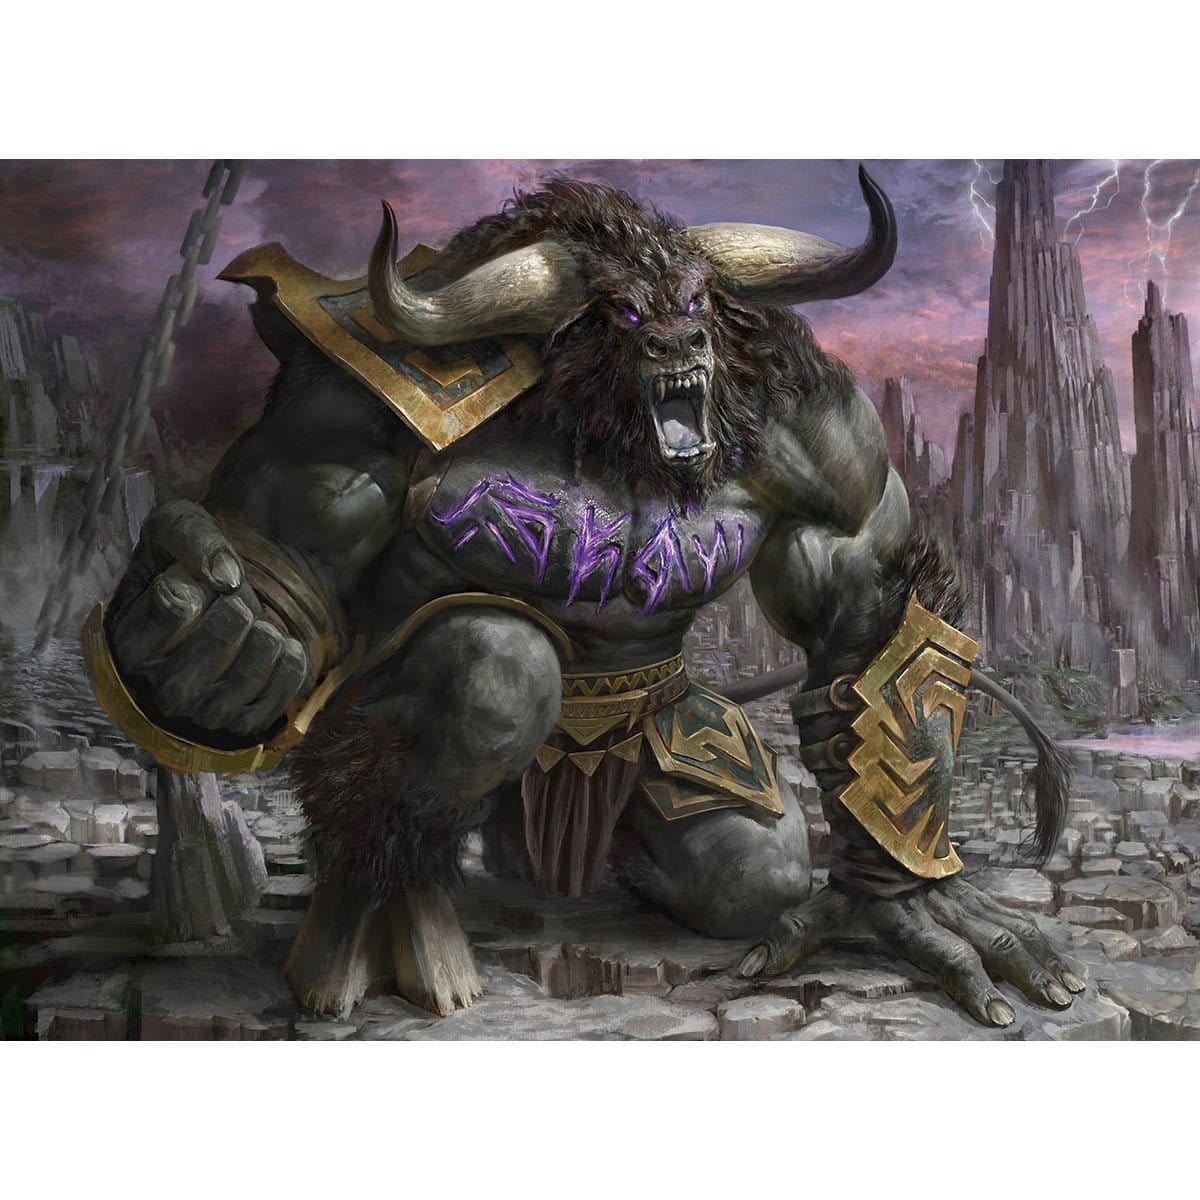 Rage-Scarred Berserker Print - Print - Original Magic Art - Accessories for Magic the Gathering and other card games